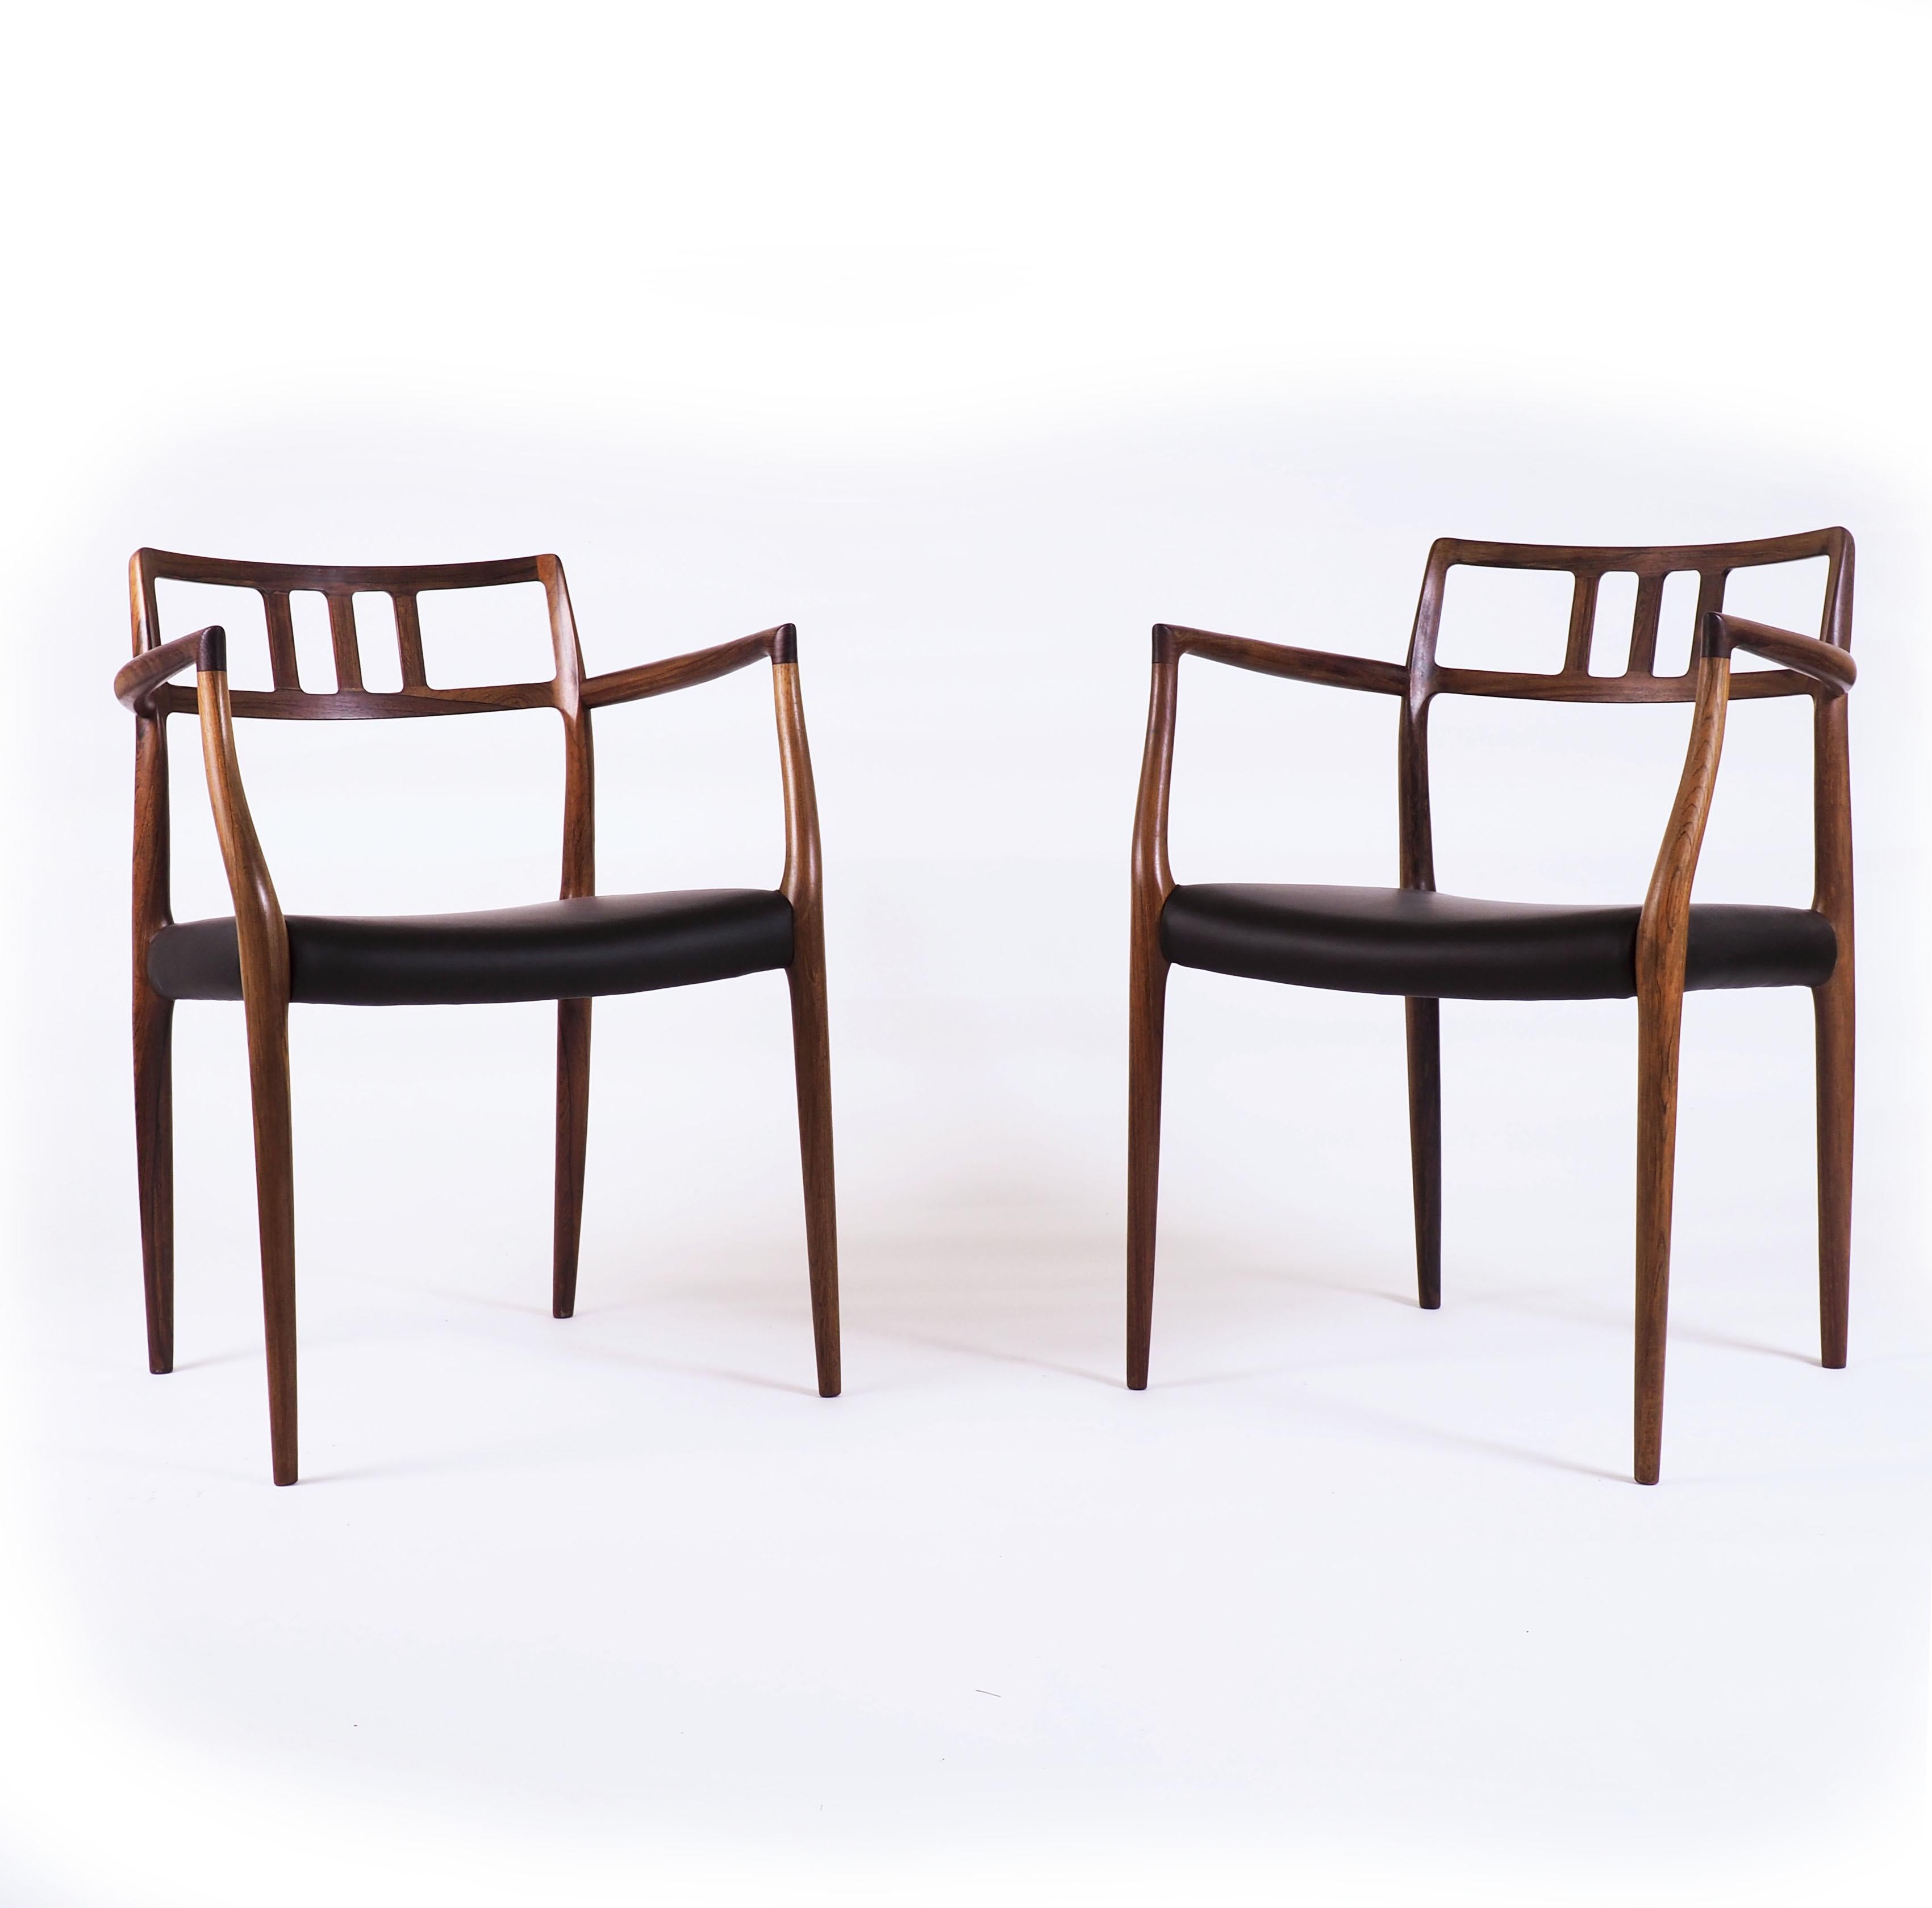 These two elegant armchairs by Niels O. Møller were made by the Danish high quality furniture make J.L.Møller. The model was numbered 64. This pair is made in solid rosewood and has got black leather seats.
The quality of the craftmanship is